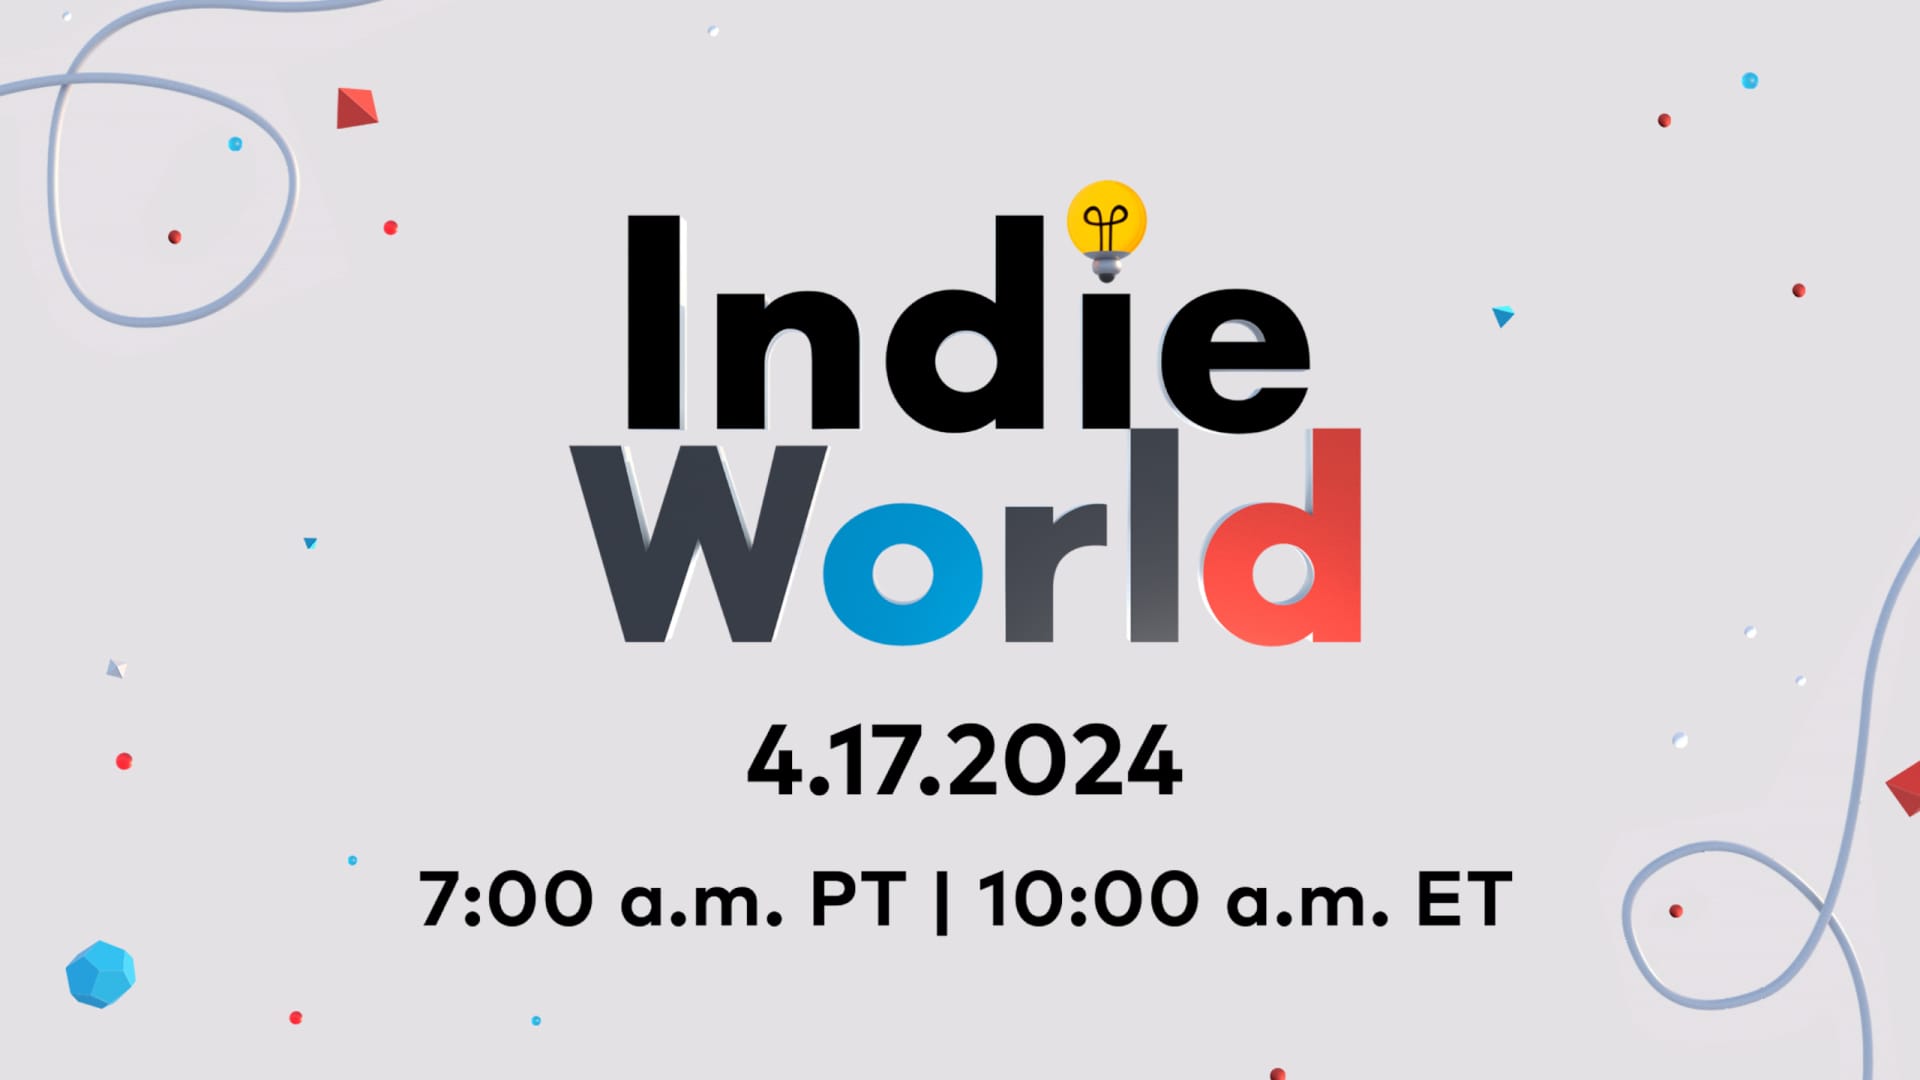 A logo for the upcoming Nintendo Indie World showcase, which airs on April 17th